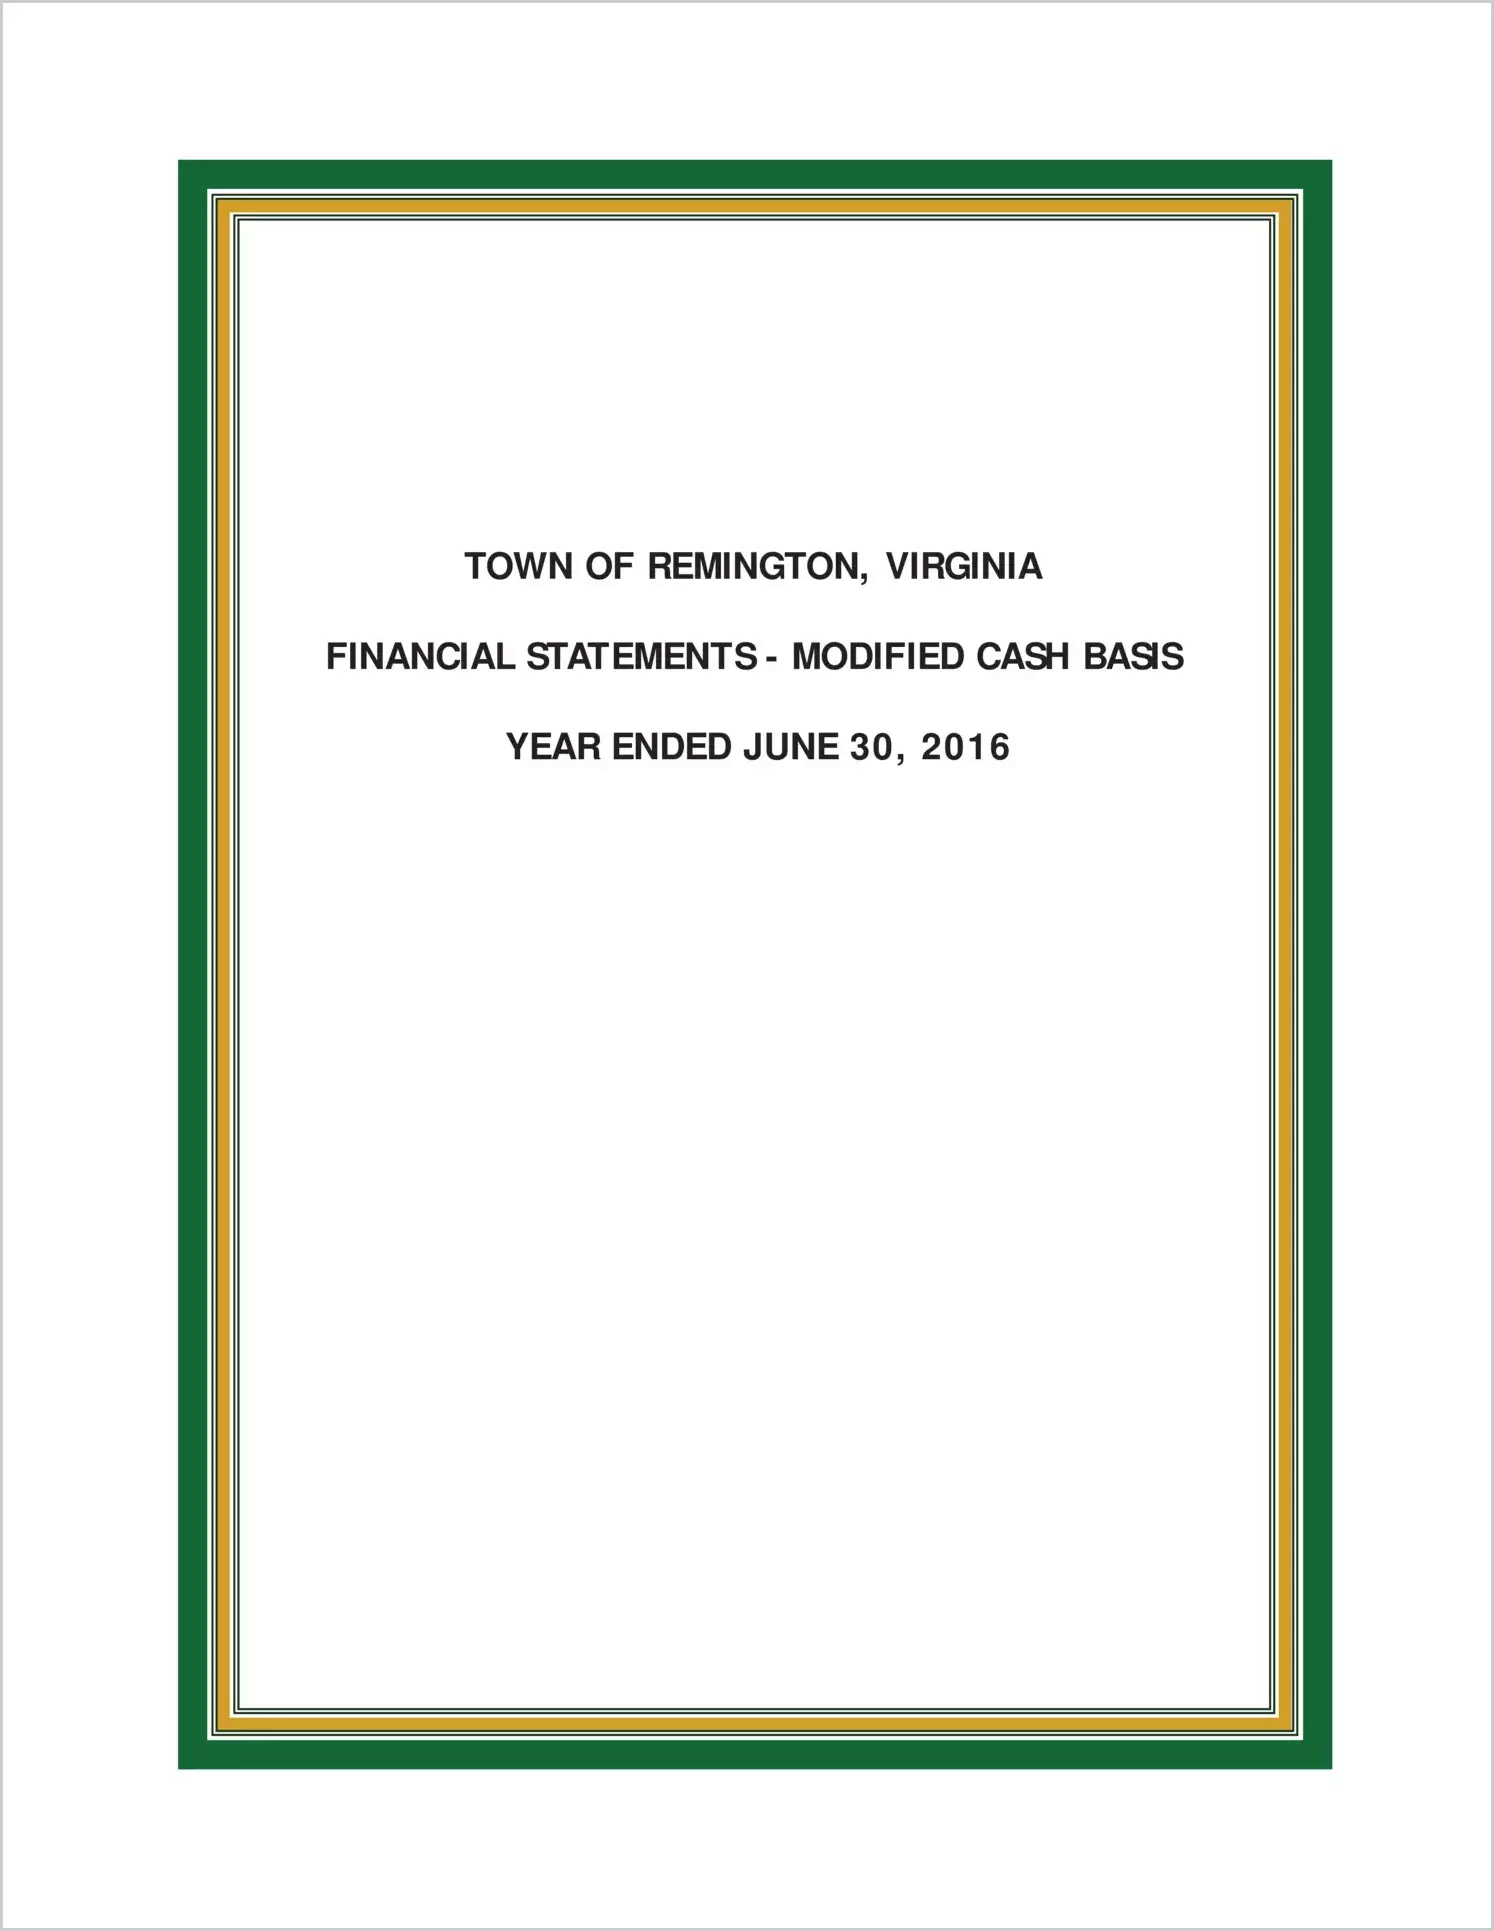 2016 Annual Financial Report for Town of Remington